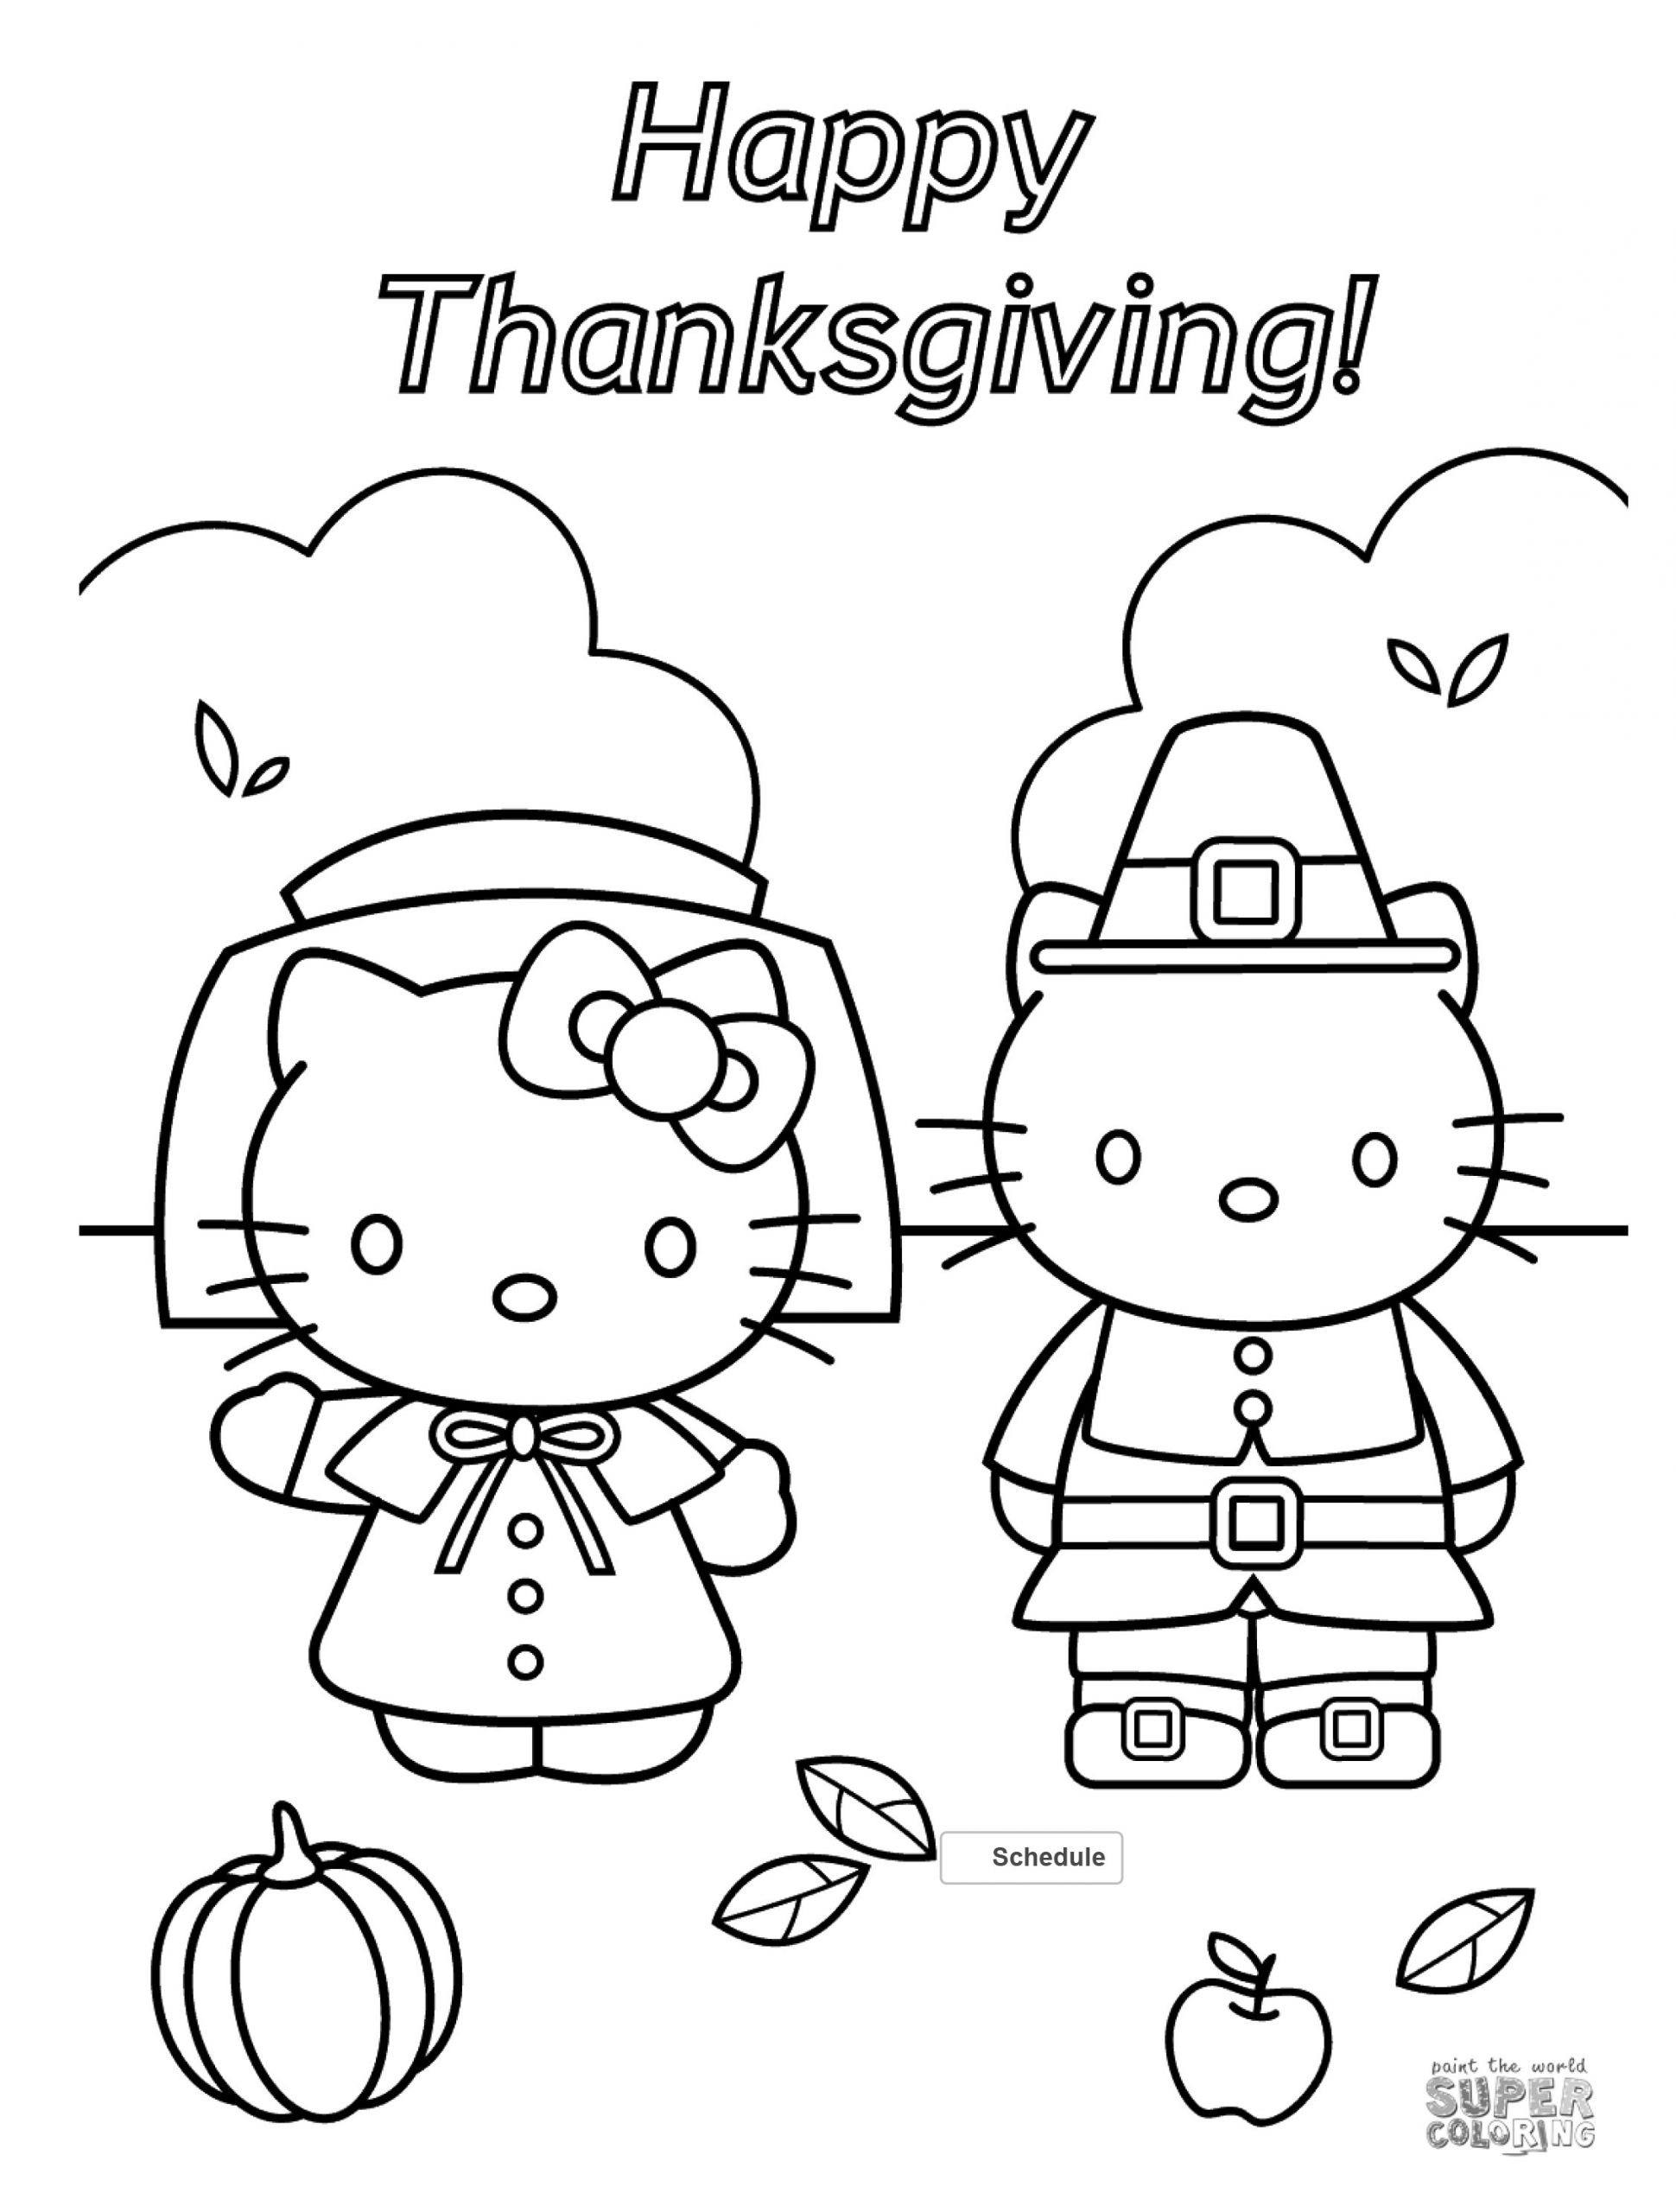 Thanksgiving Coloring Pages For Toddlers
 FREE Thanksgiving Coloring Pages for Adults & Kids